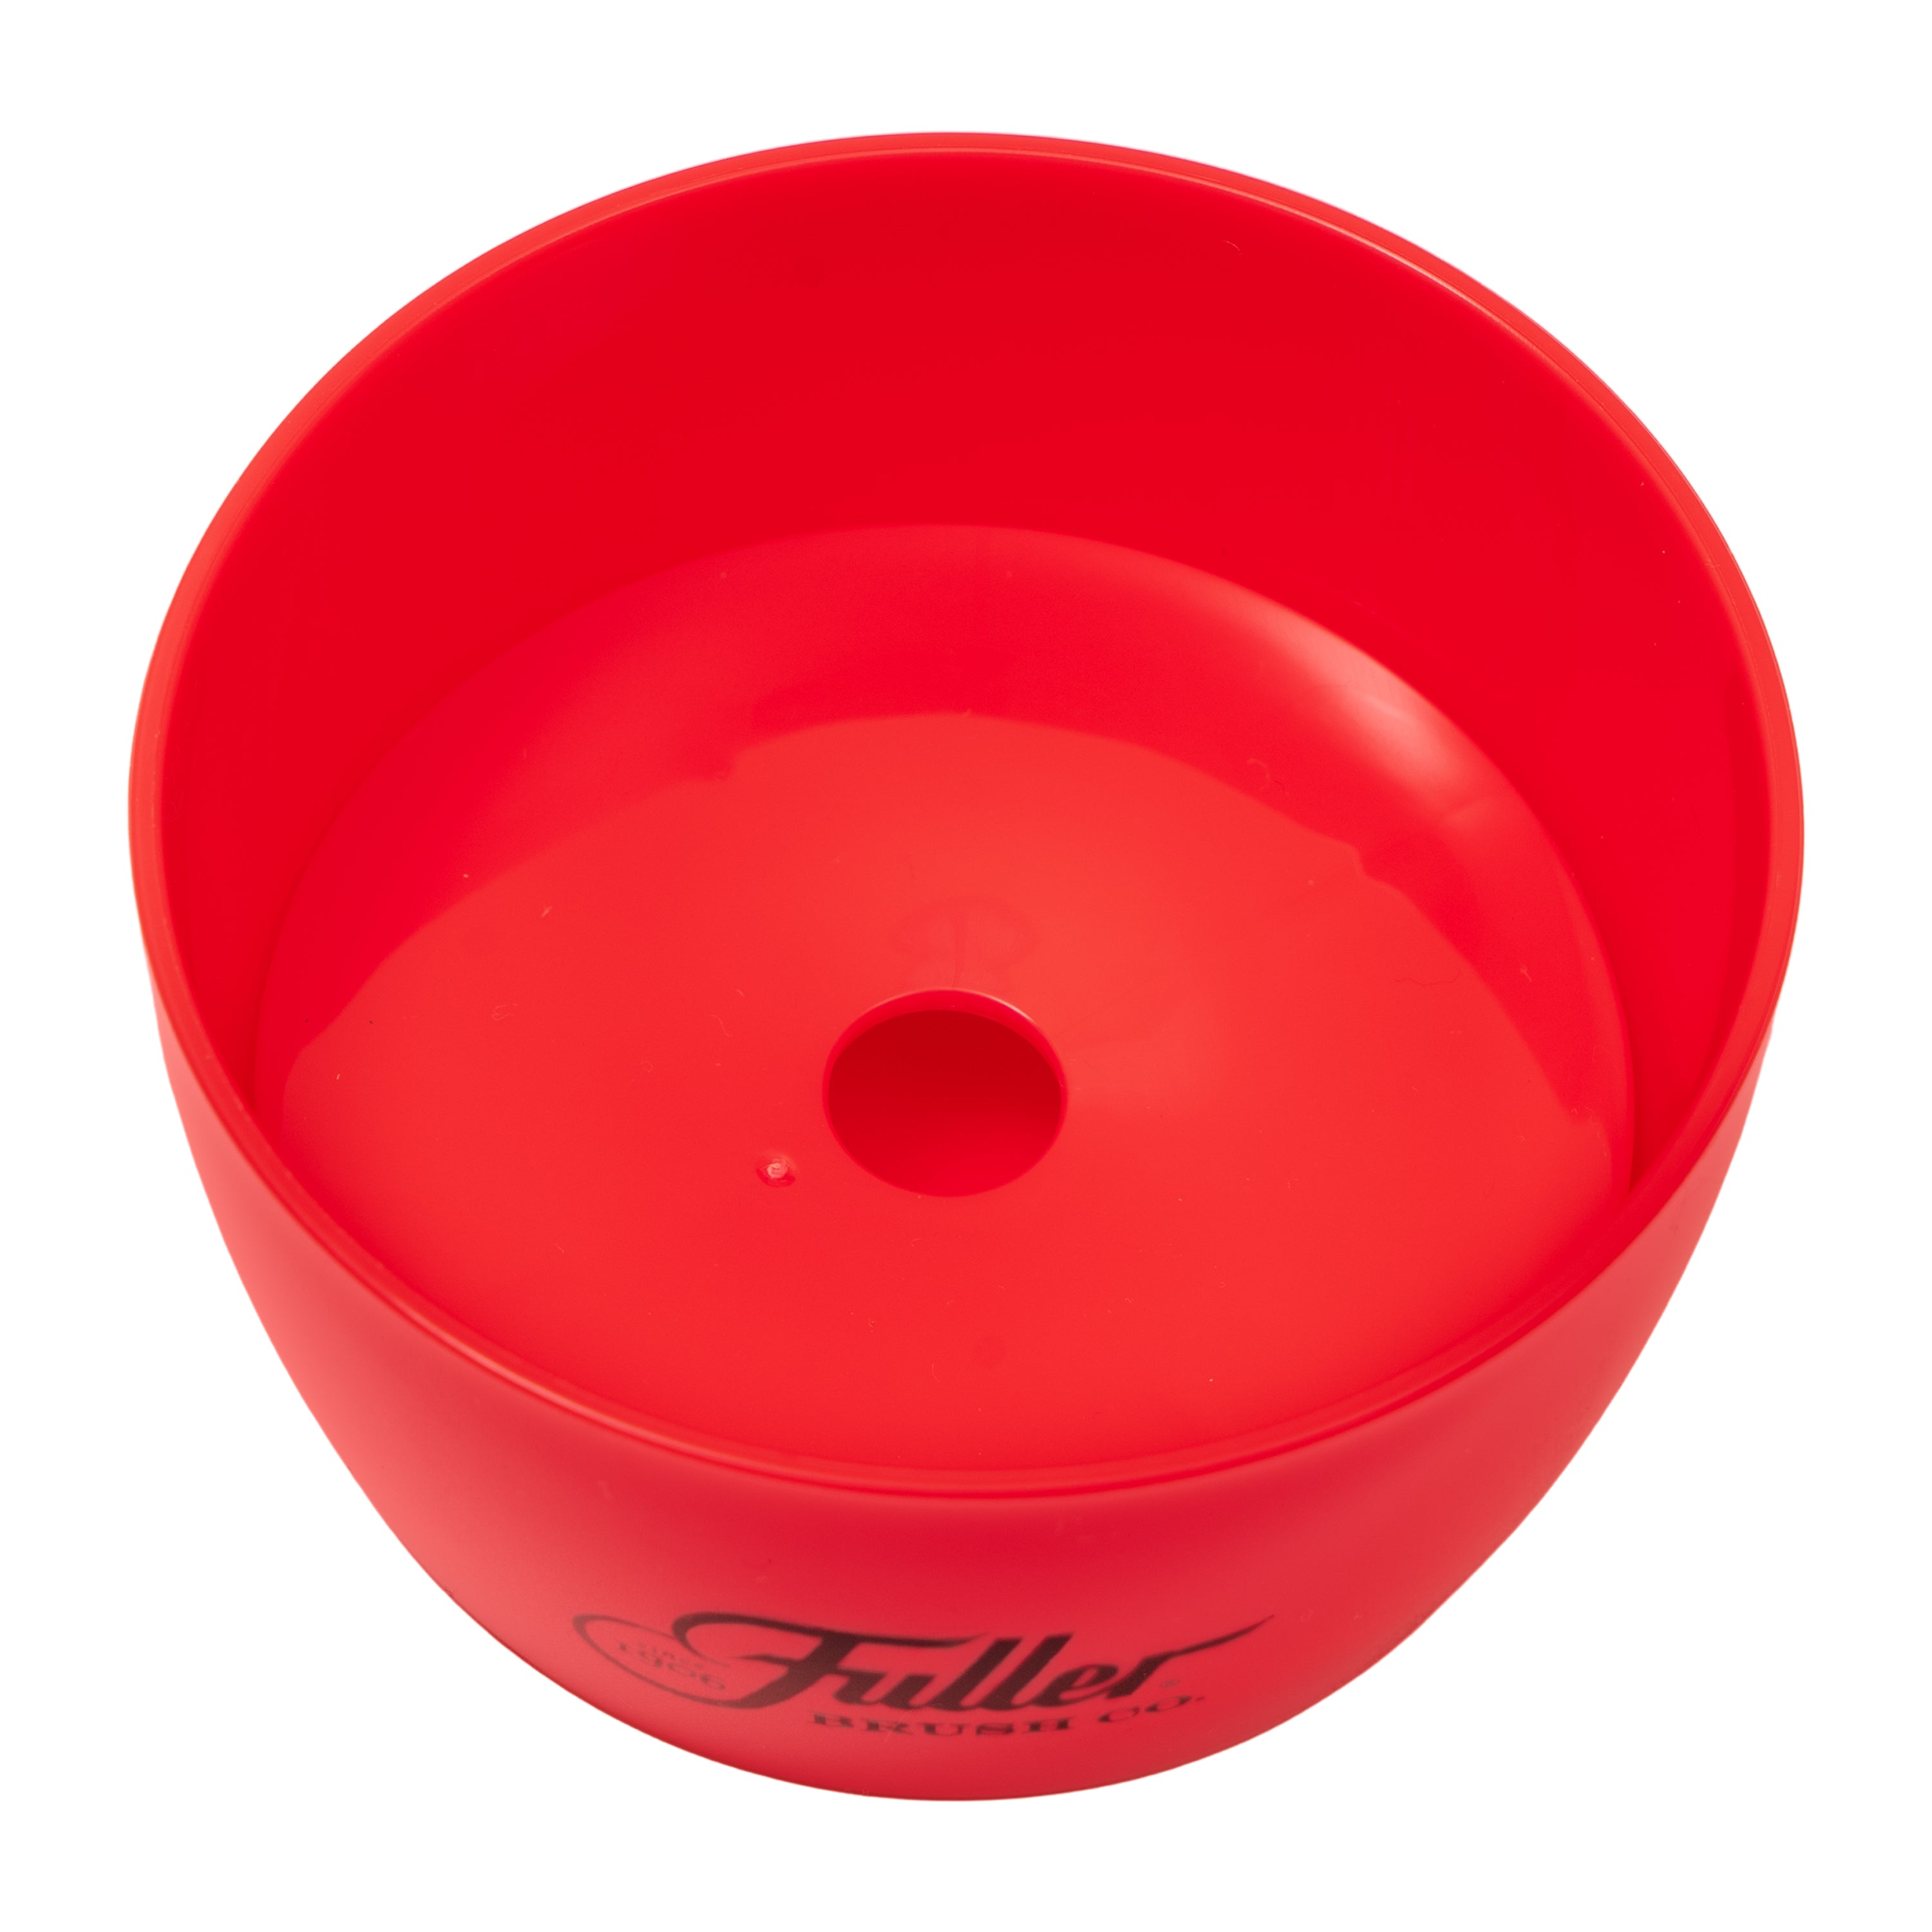 Handy Holder – Round Small-Profile Plastic Holder For Kitchen Sponges & Small Items